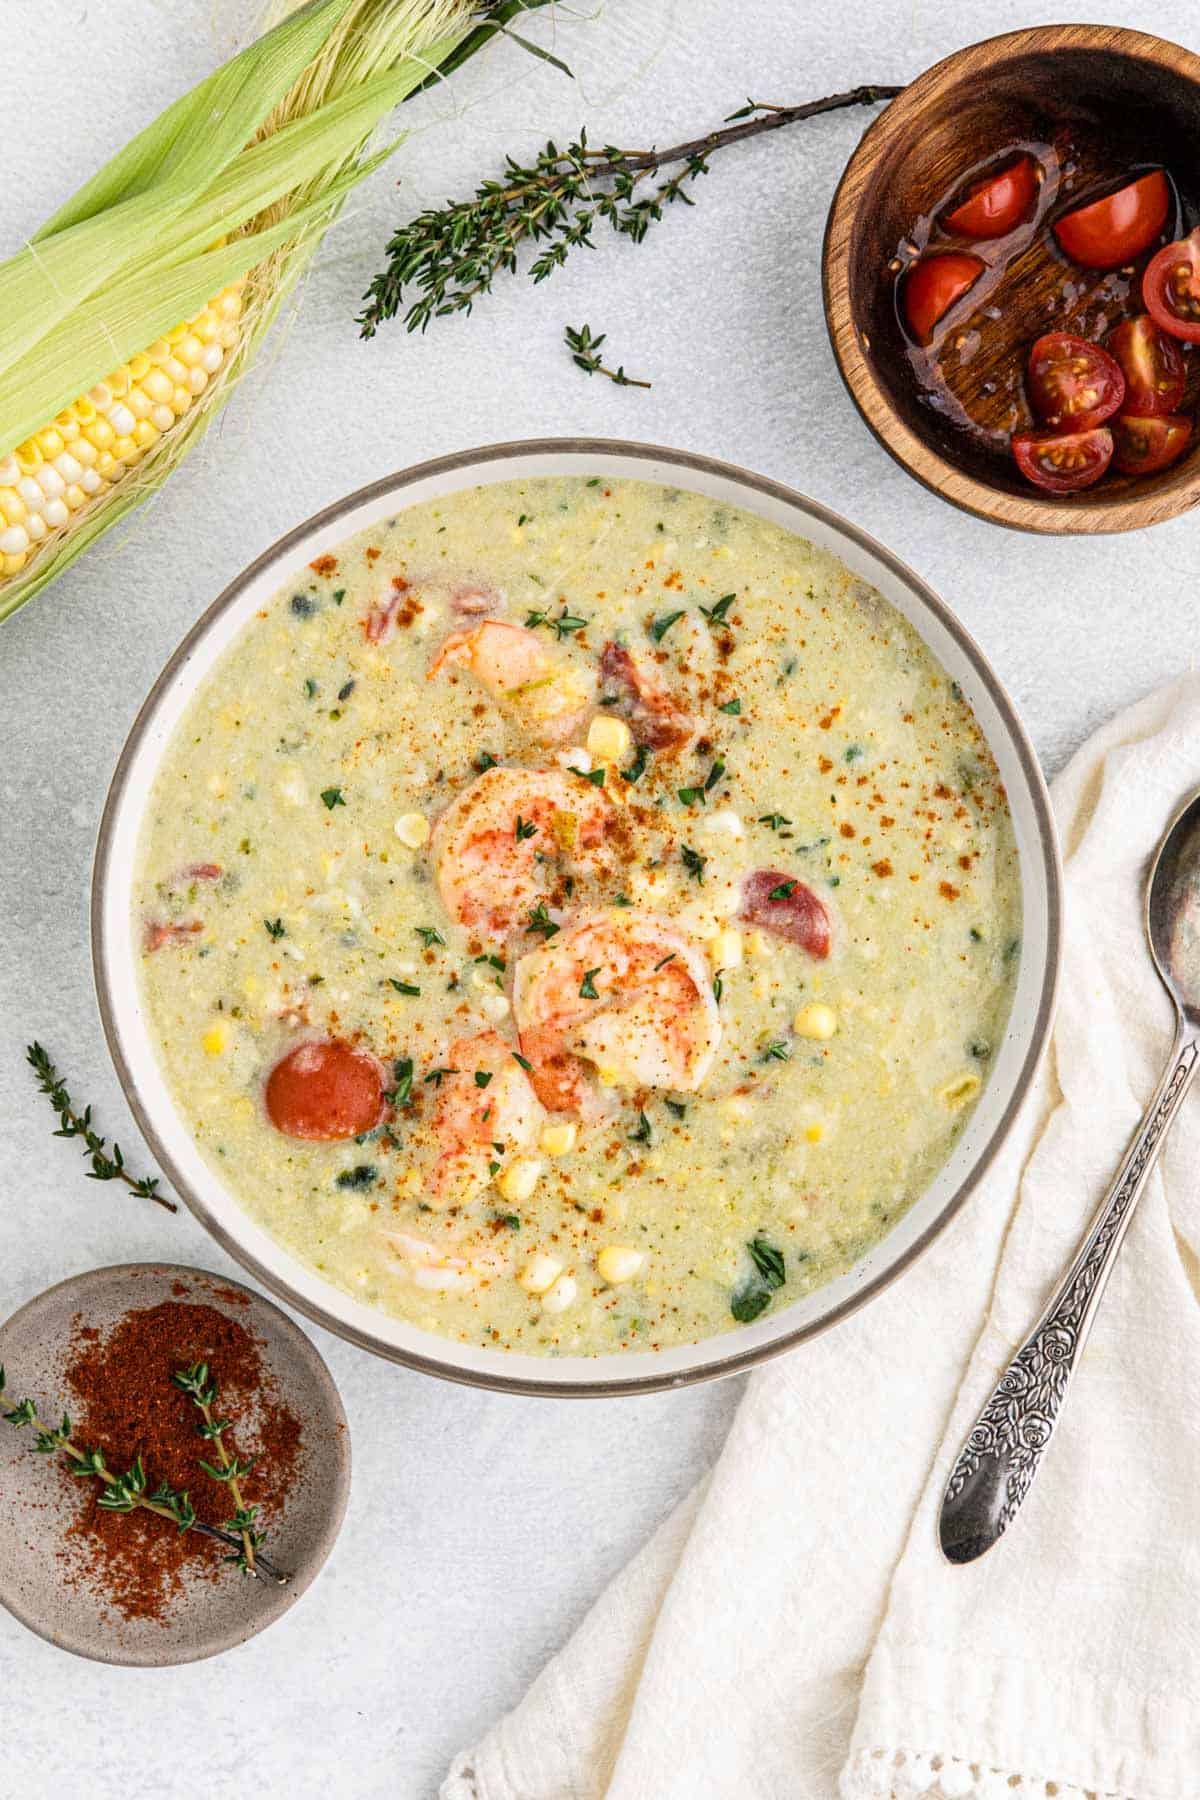 A large bowl of shrimp and corn chowder on the table with shrimp on top and a bowl of tomatoes and fresh corn on the side.